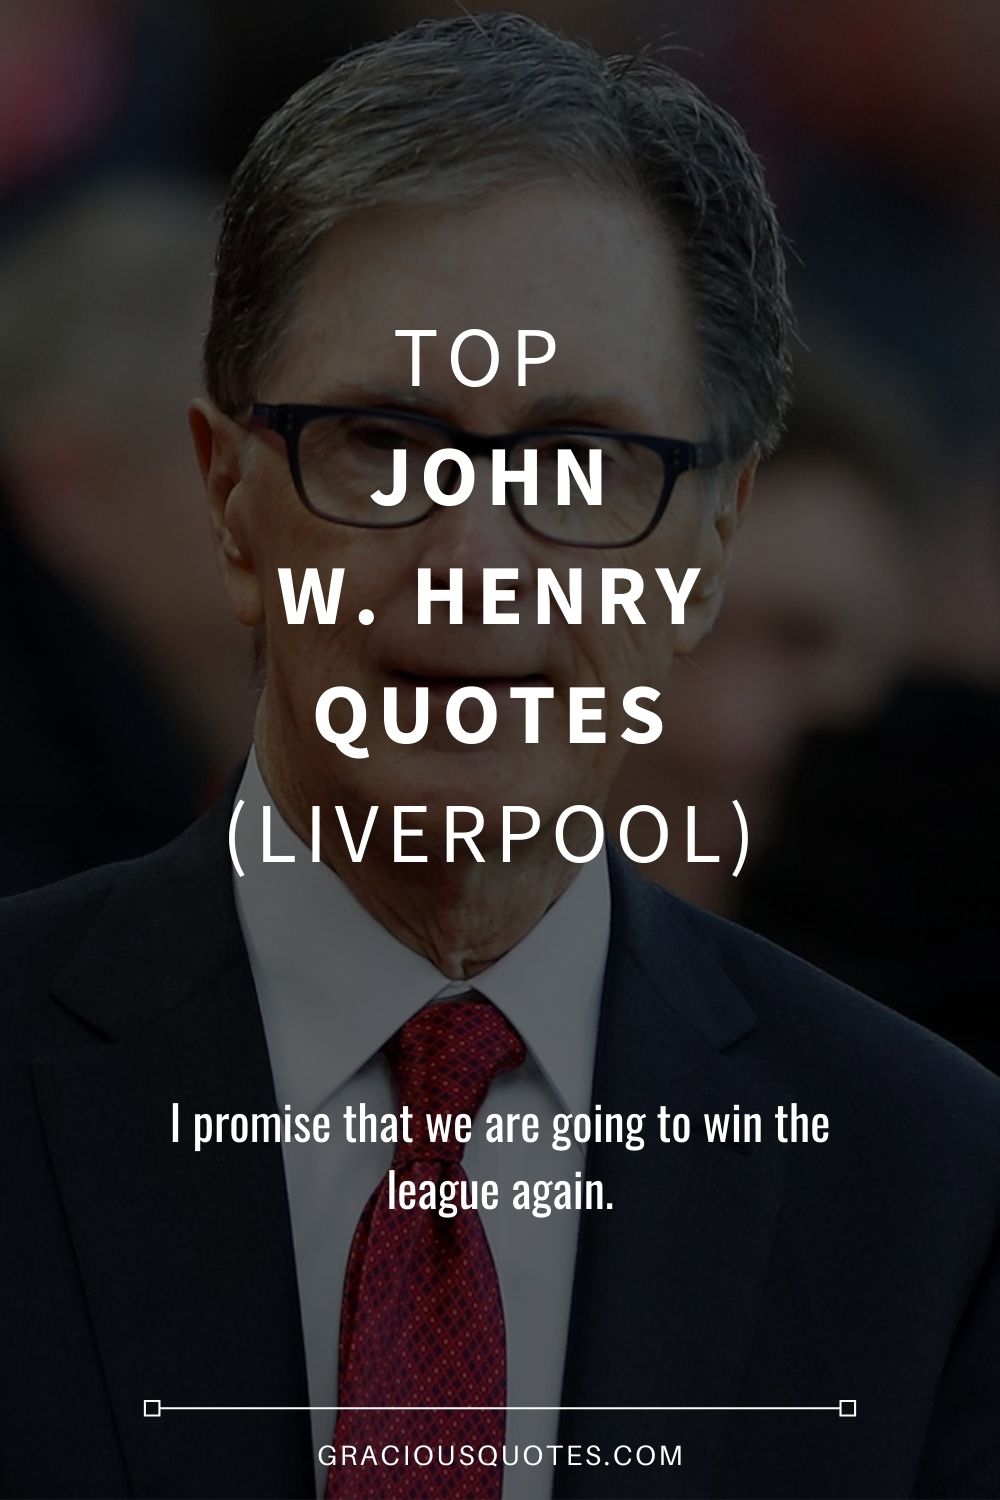 Top John W. Henry Quotes (LIVERPOOL) - Gracious Quotes